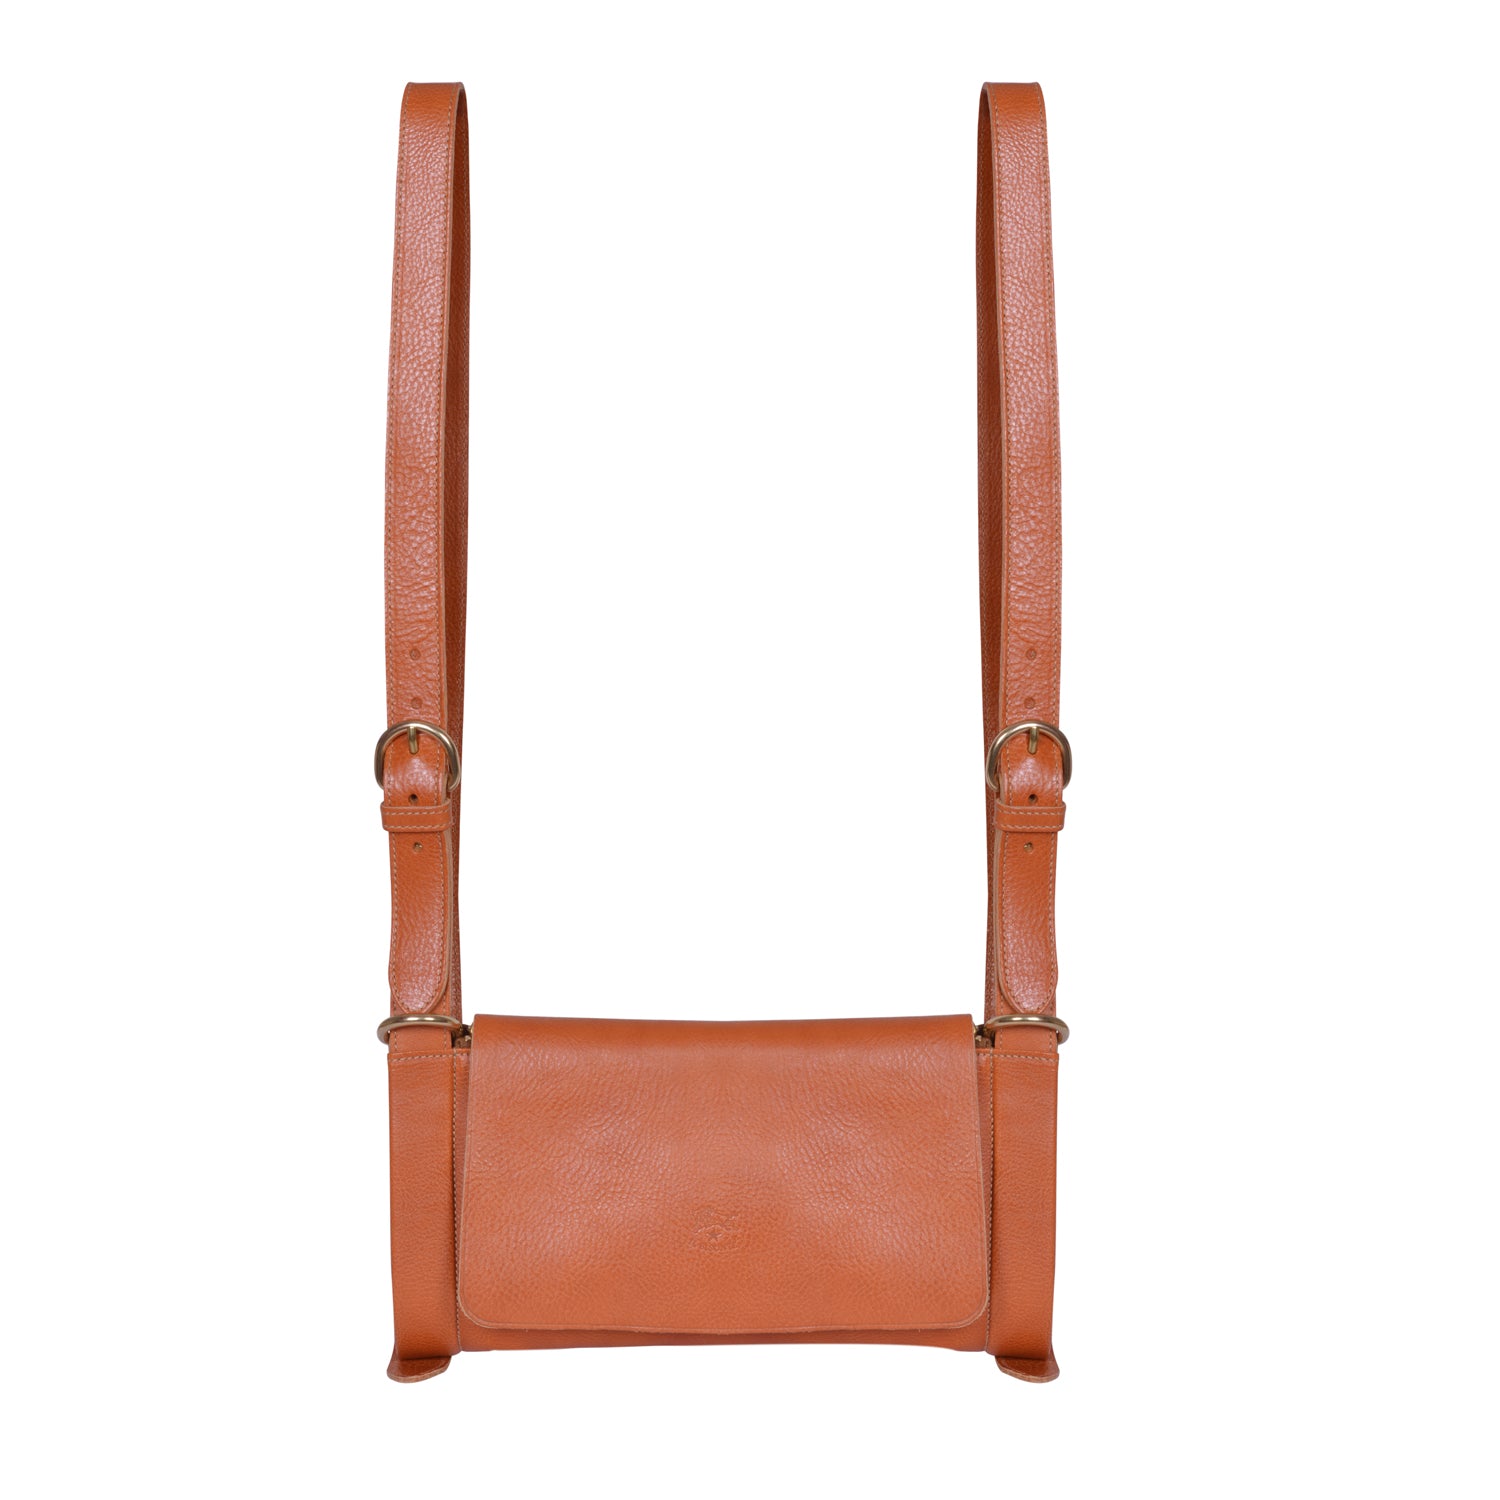 IL BISONTE ESCAPE WOMEN'S  BACKPACK  IN CARAMEL COWHIDE LEATHER